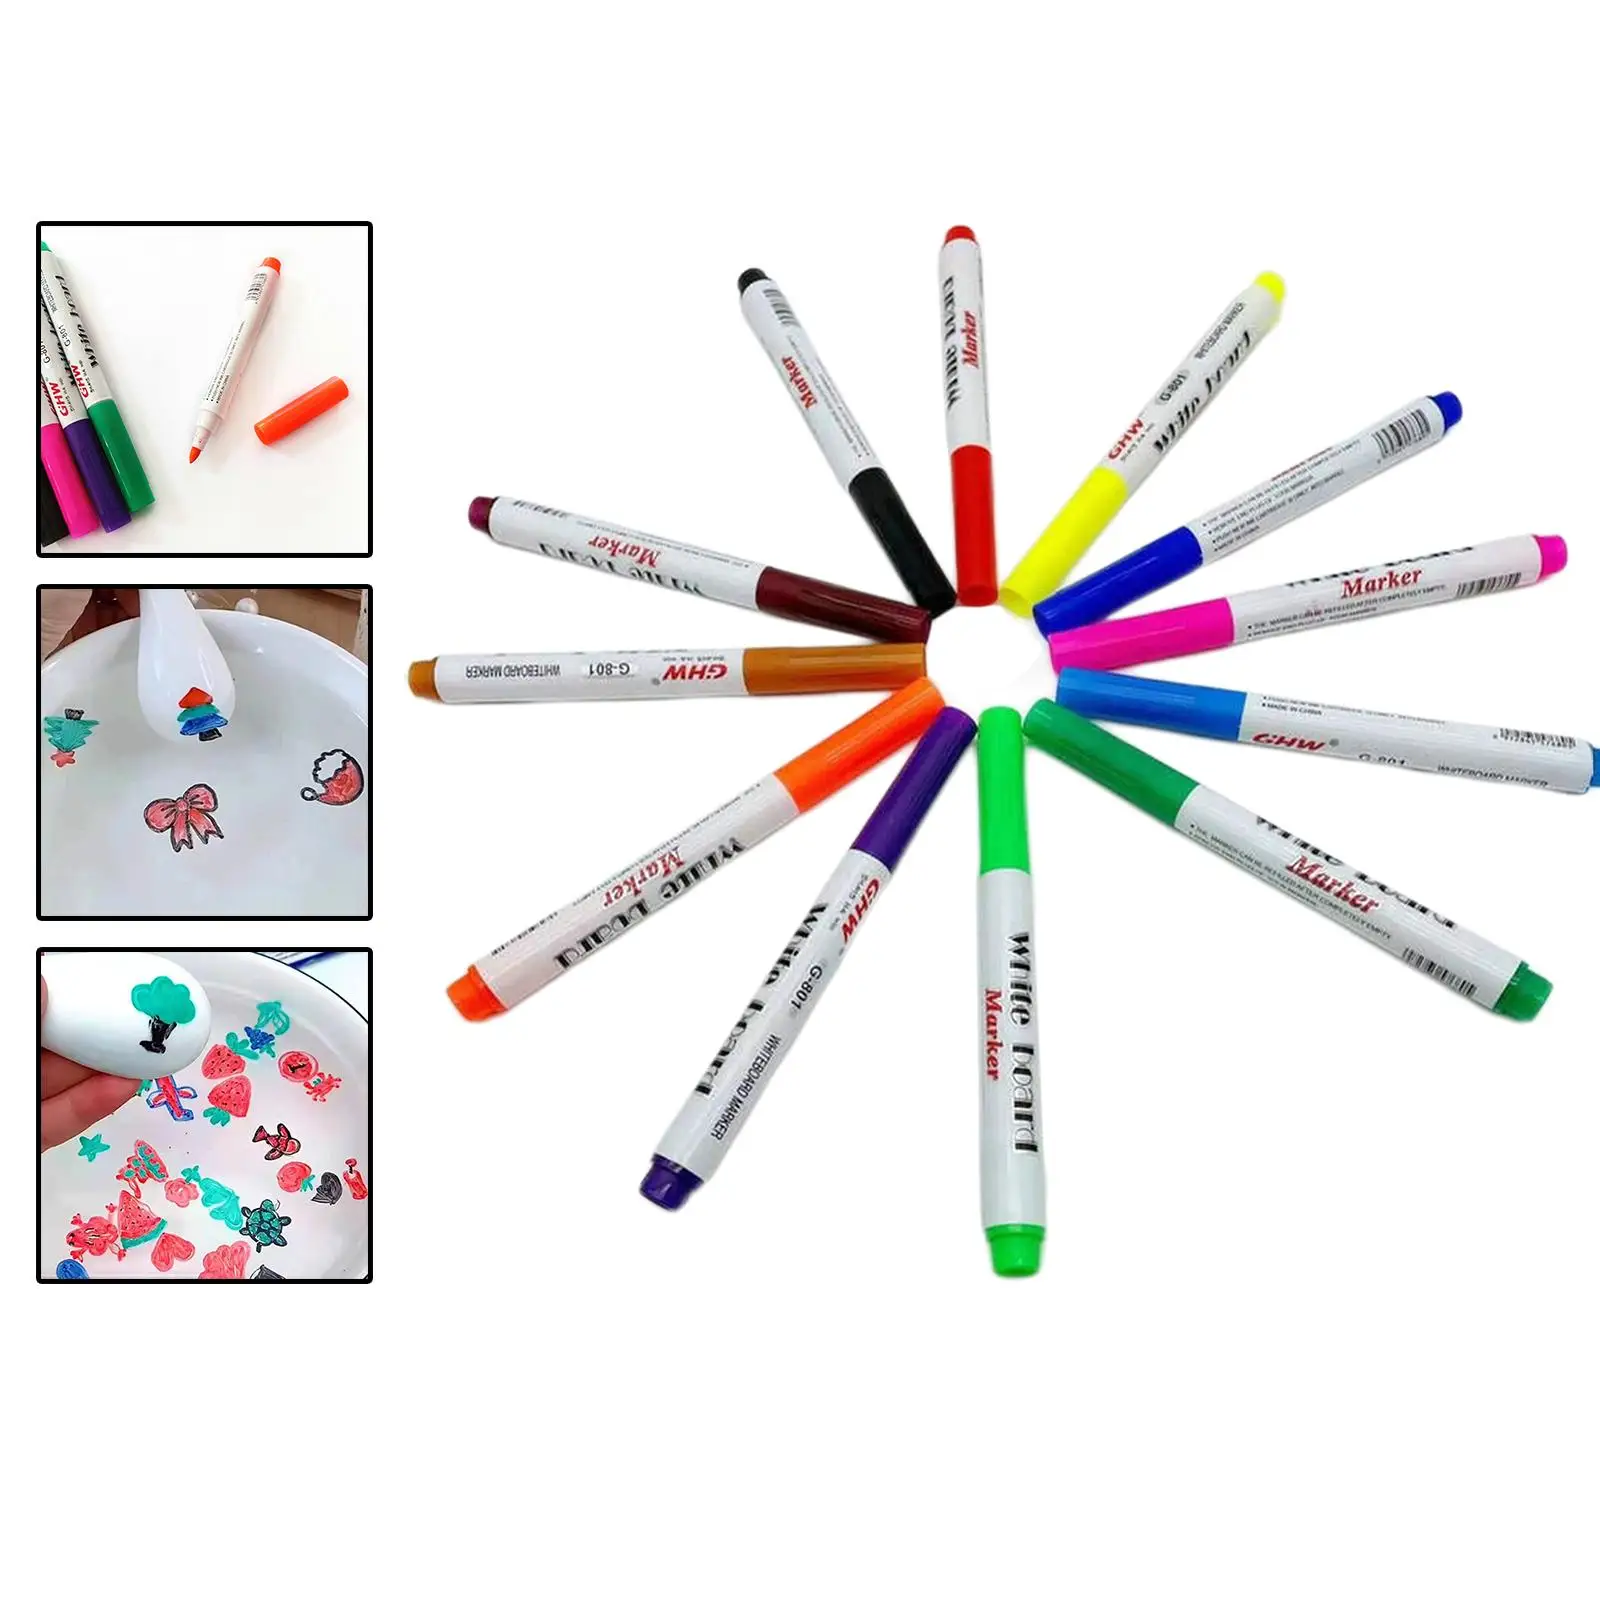 Water Painting Pen Whiteboard Pen Water Writing   Boys Holiday Gifts